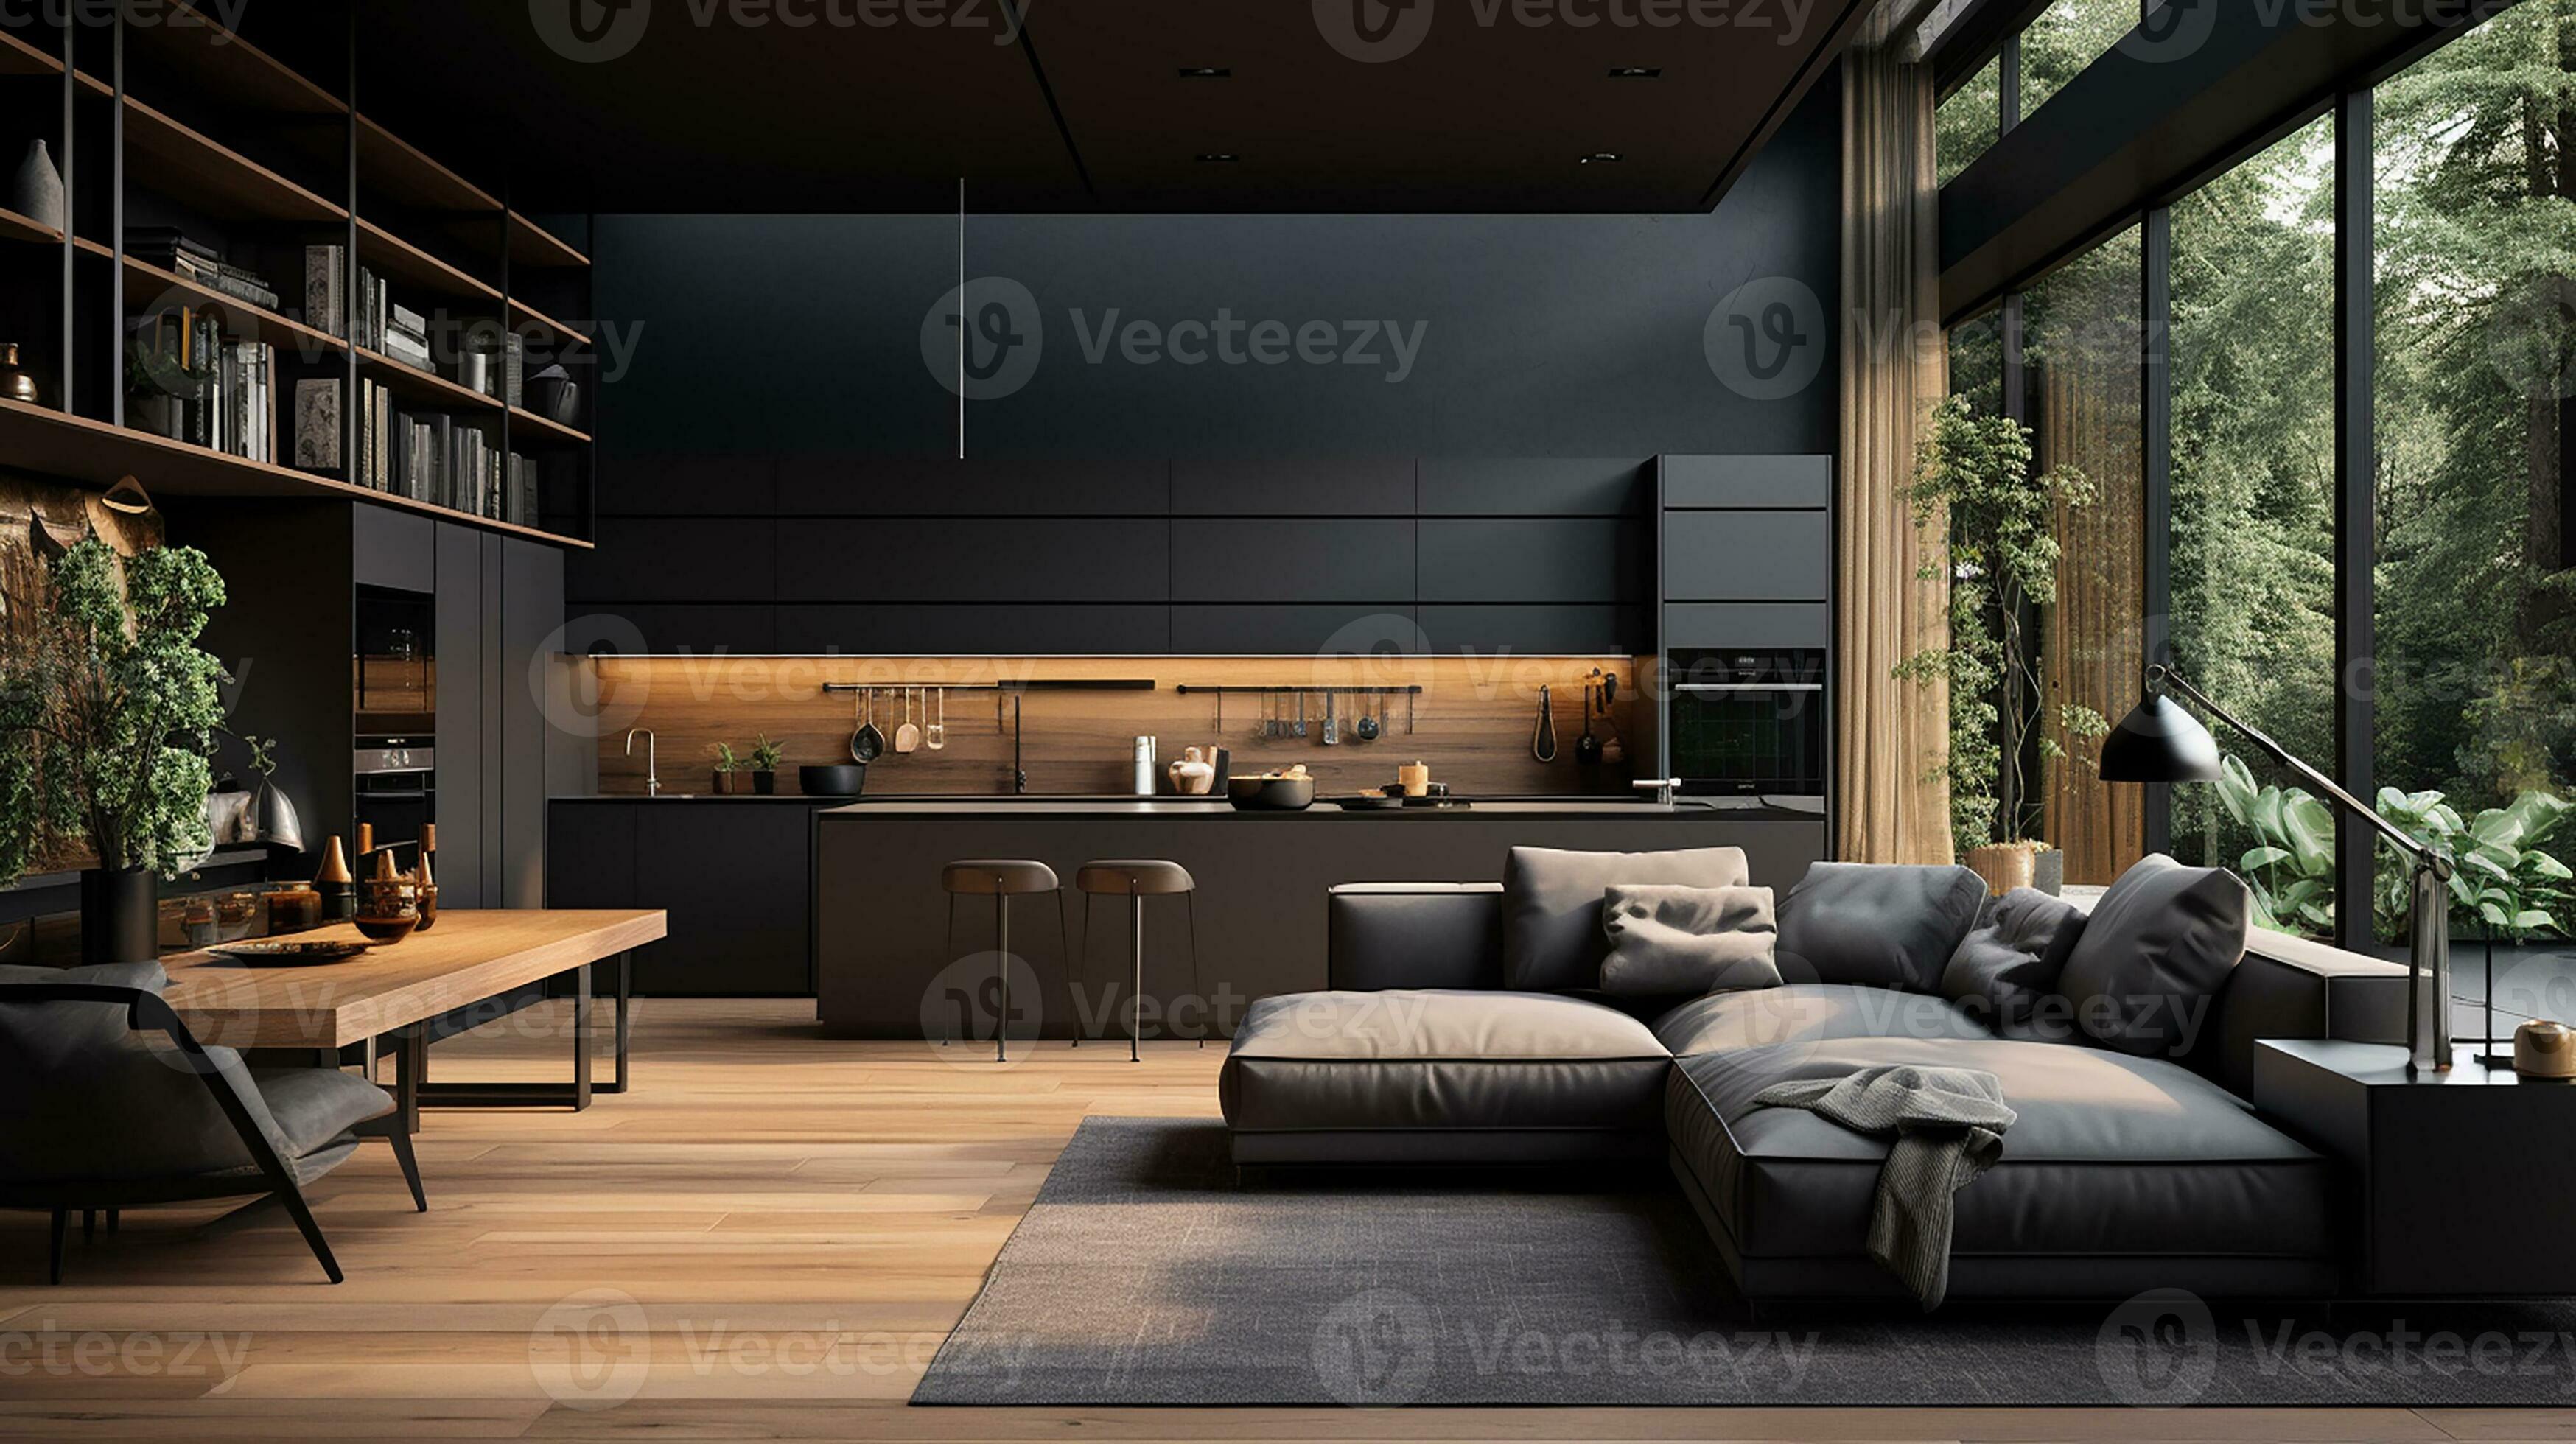 https://static.vecteezy.com/system/resources/previews/031/210/580/large_2x/modern-interior-design-kitchen-and-bright-spacious-room-with-a-comfortable-sofa-plants-and-elegant-accessories-black-walls-parquet-floor-generative-ai-photo.jpg